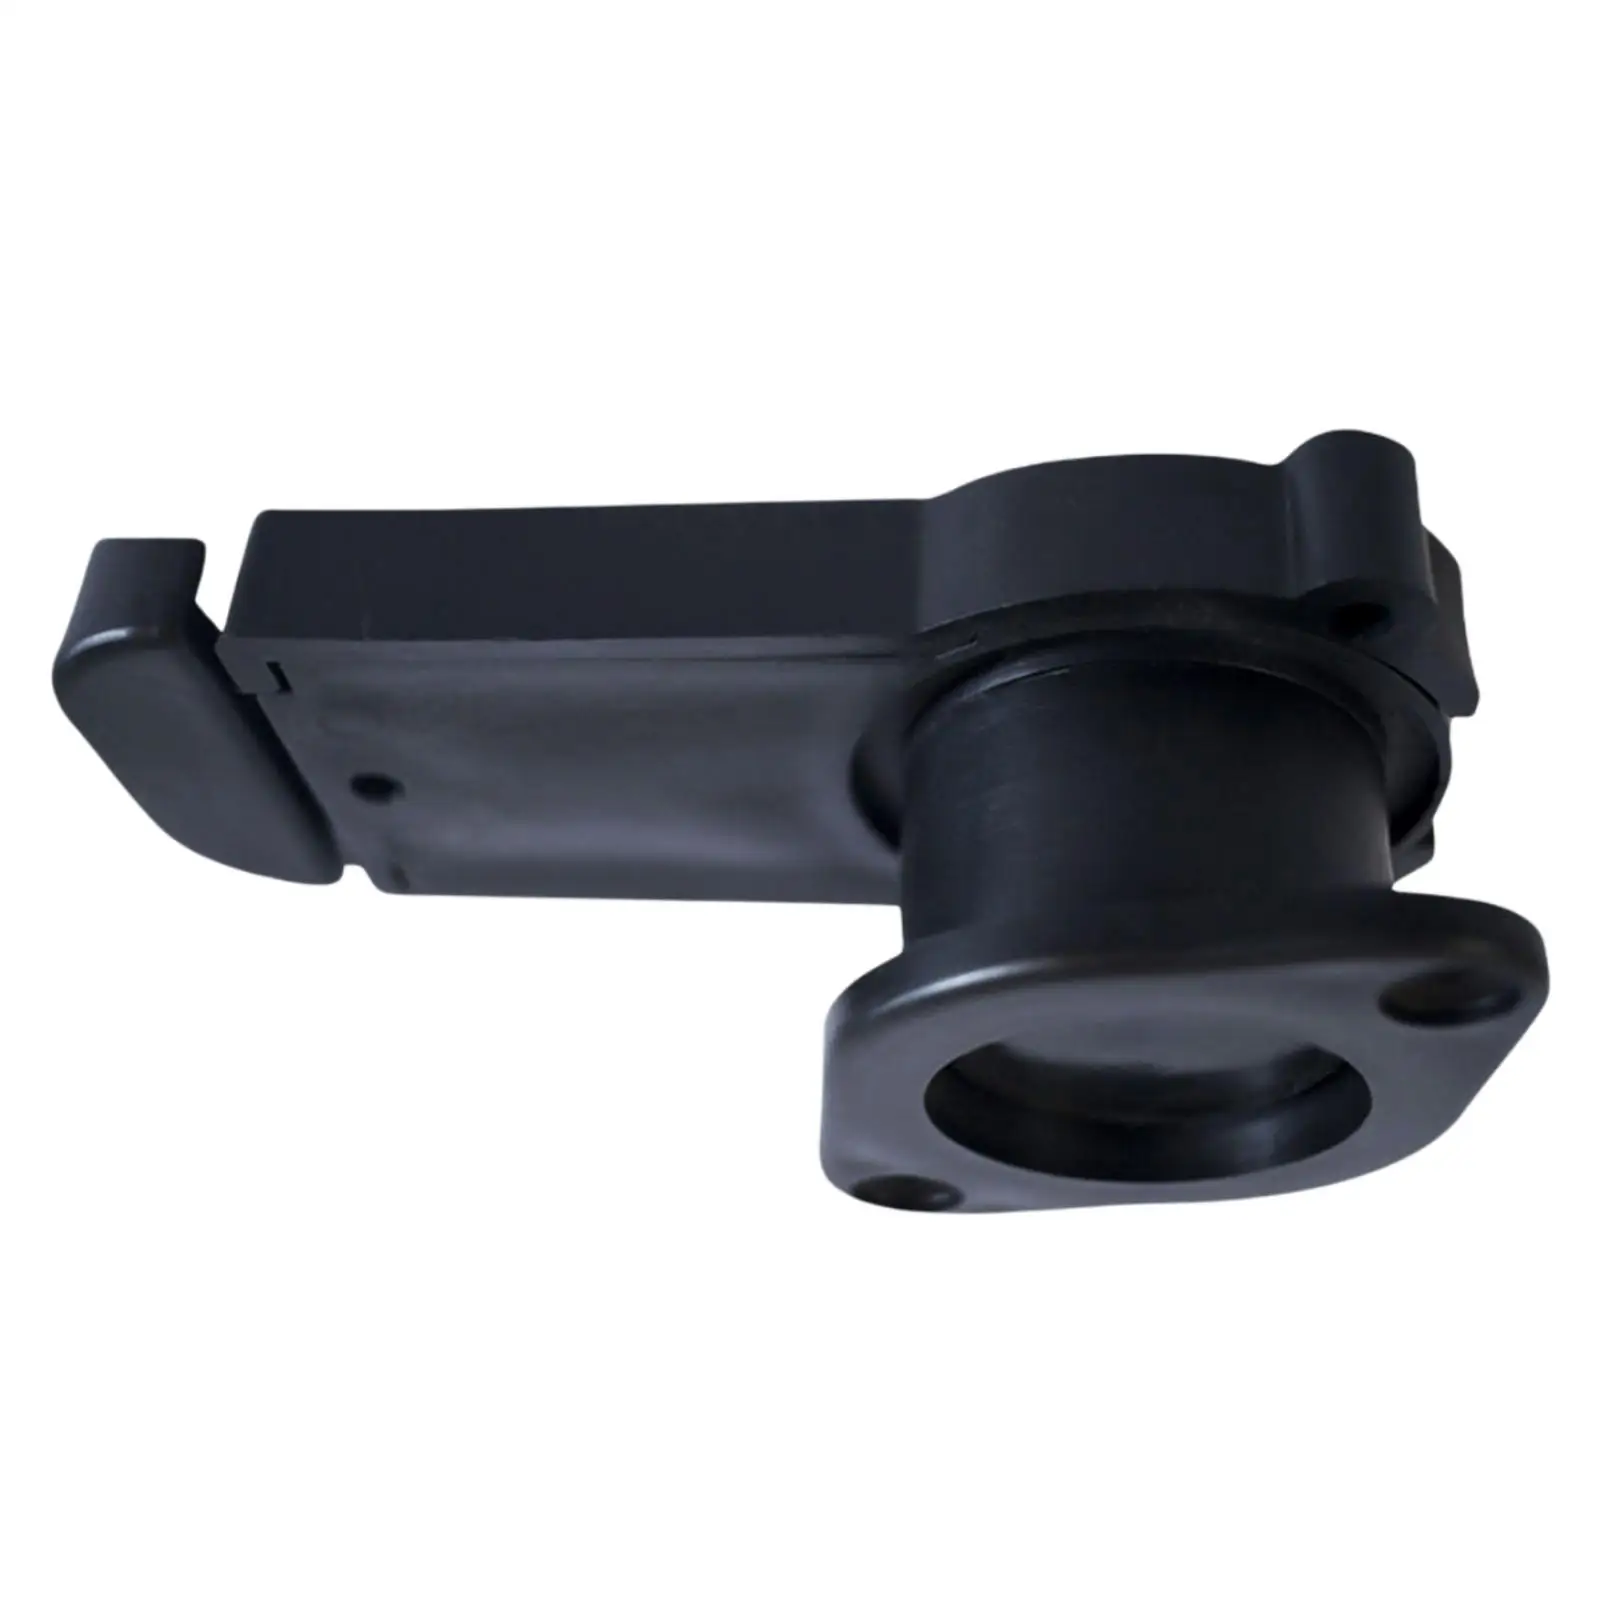 Marine Kayak Boat PVC Scupper Drain Pull Out Valve Plug Direct Replaces Fishing Canoe -Black ,Prevent Water Entering Boat